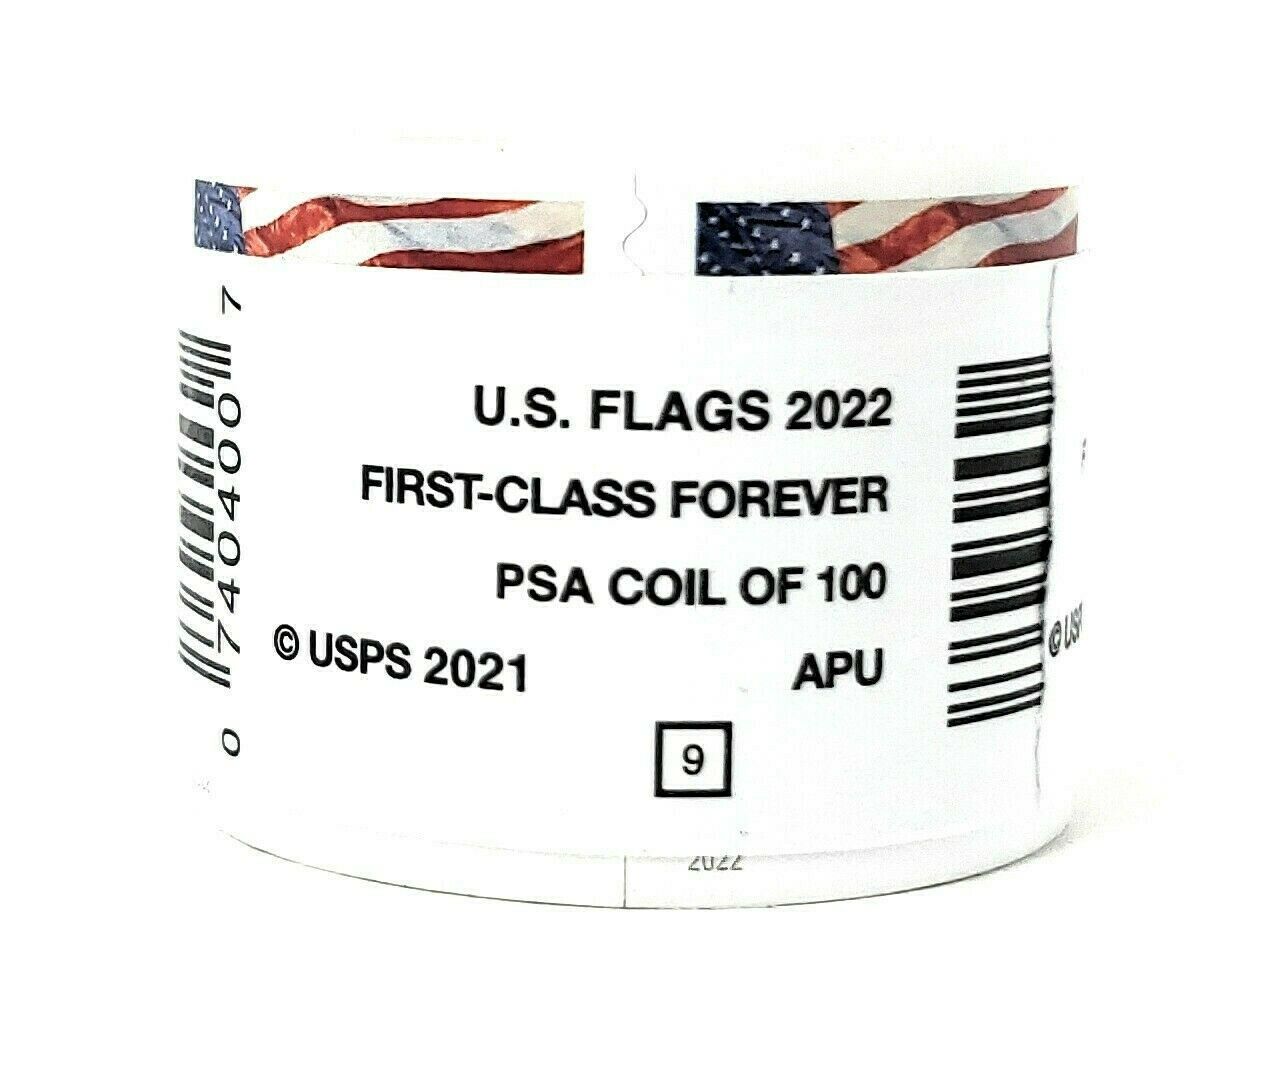 U.S. Flag 2022 Stamps(Roll Of 100) - Buy Discount Stamp